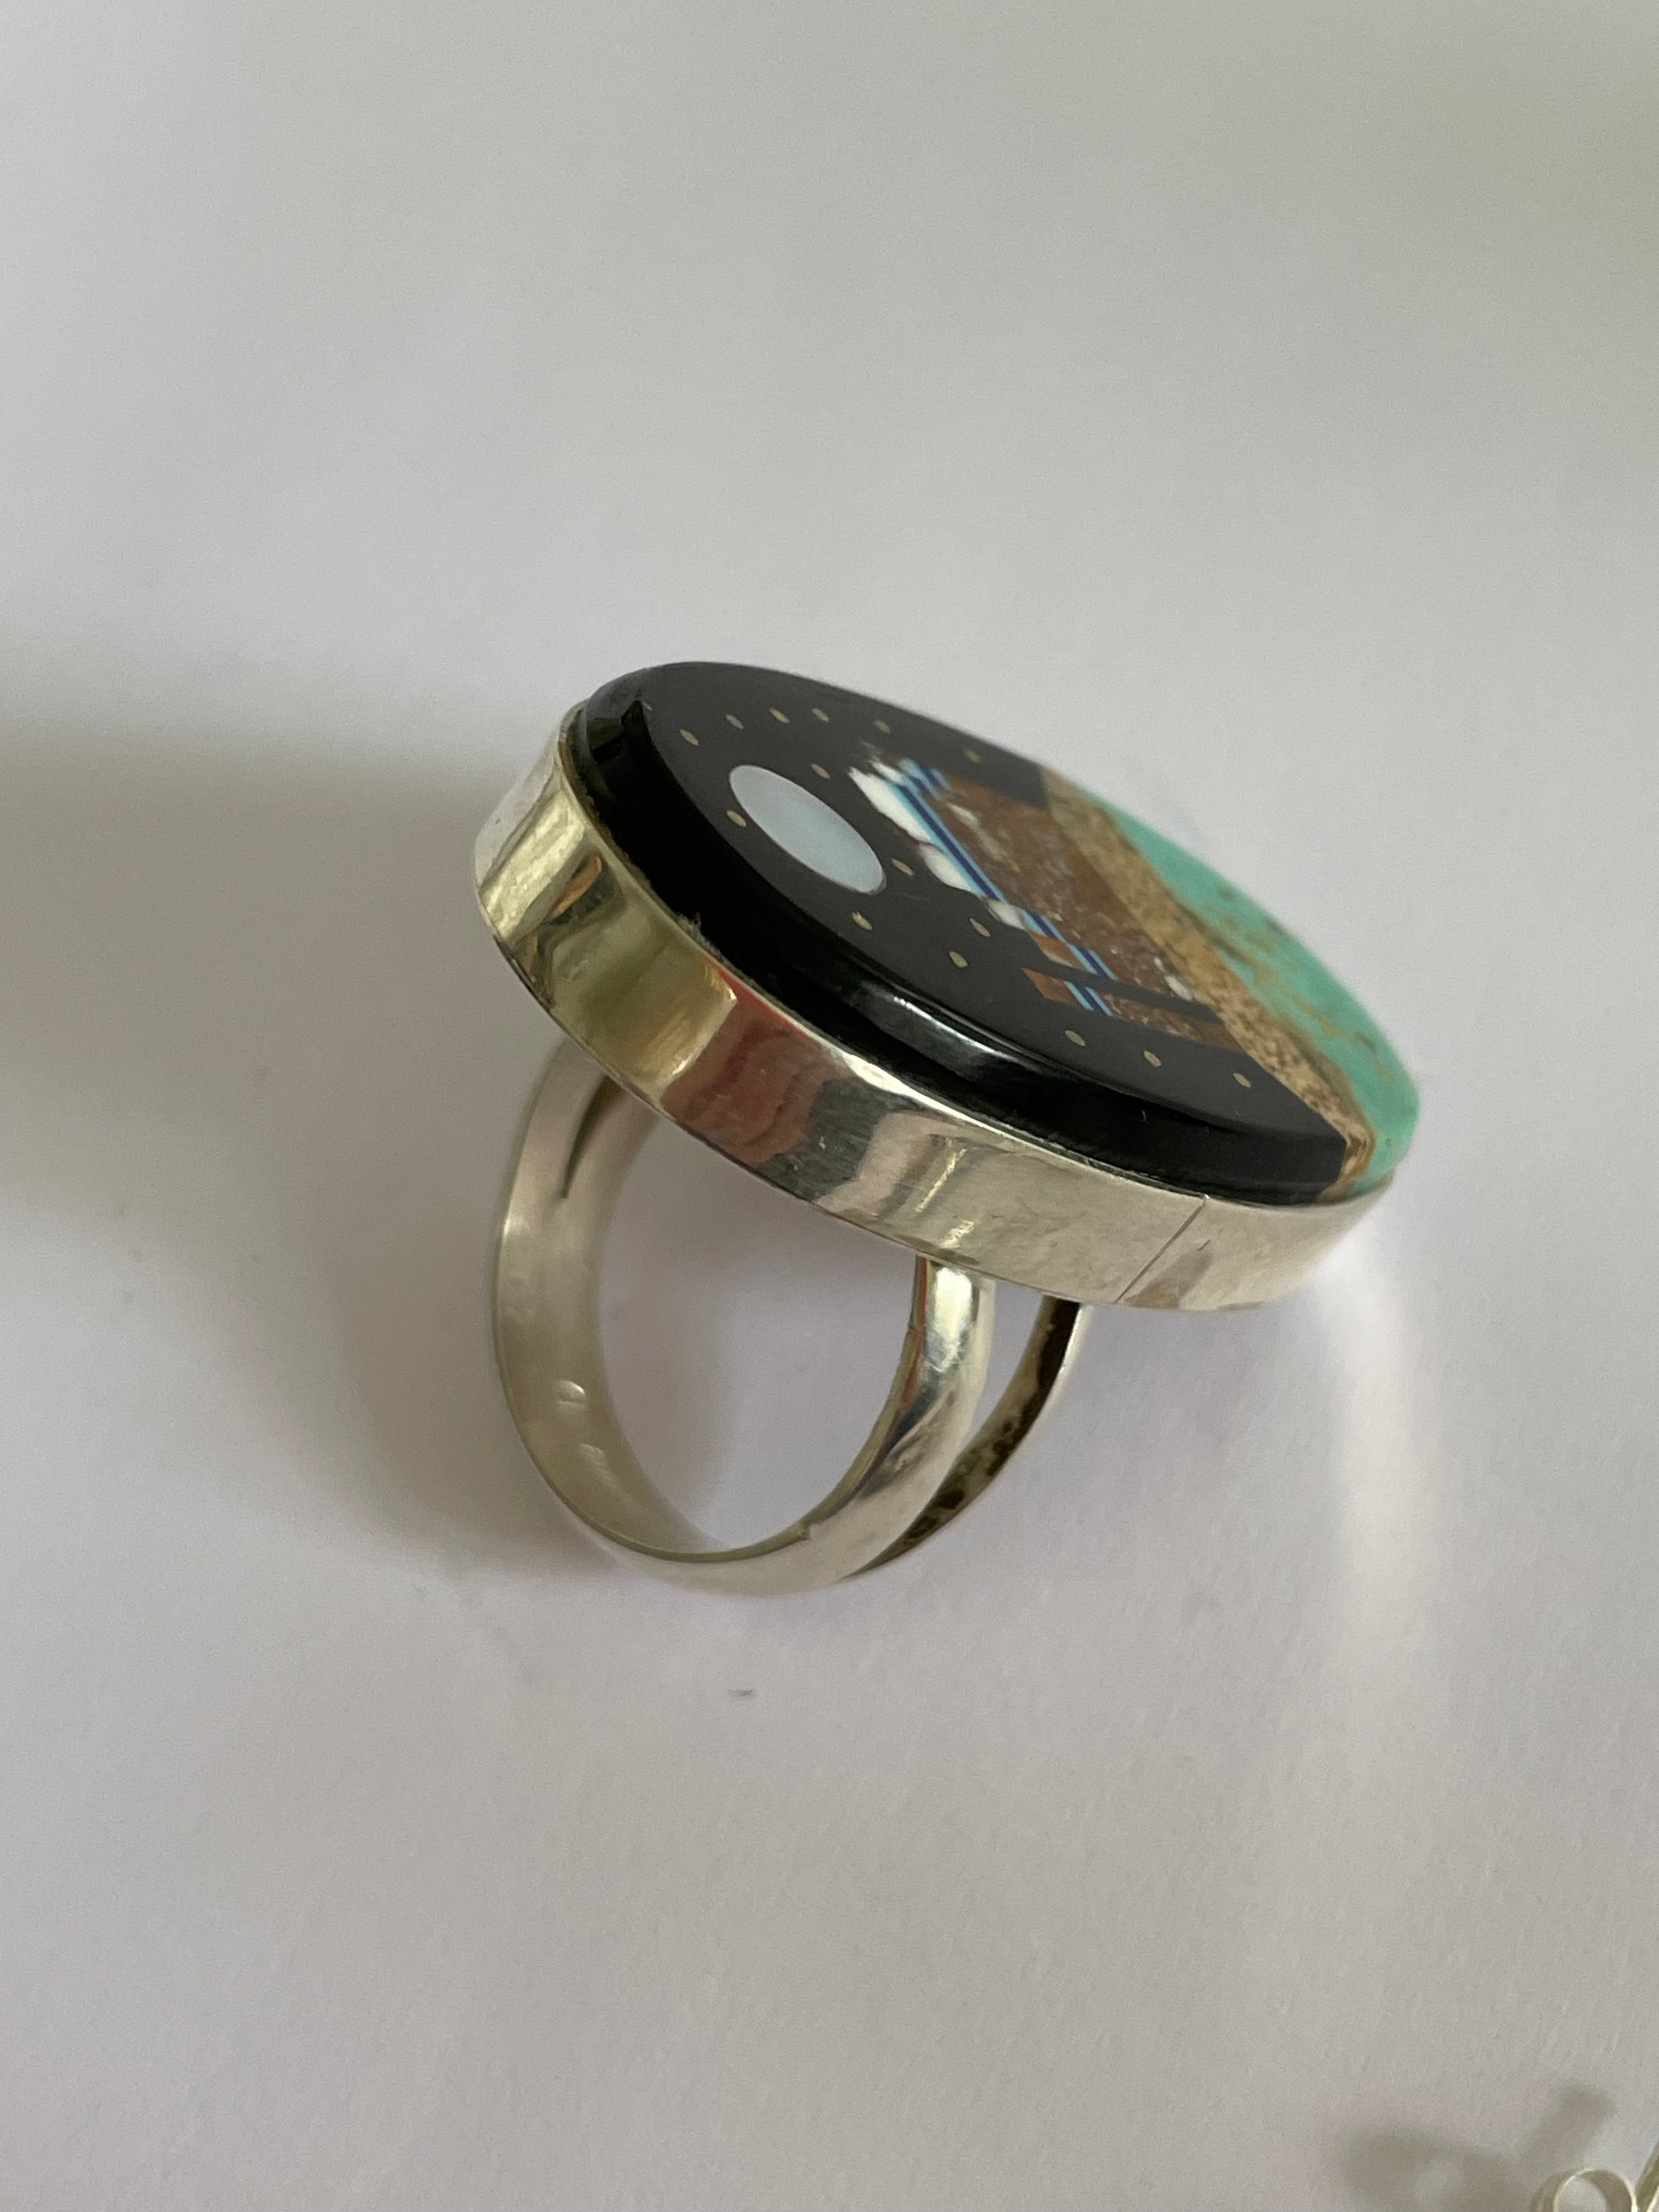 Inlaid stone monument valley ring